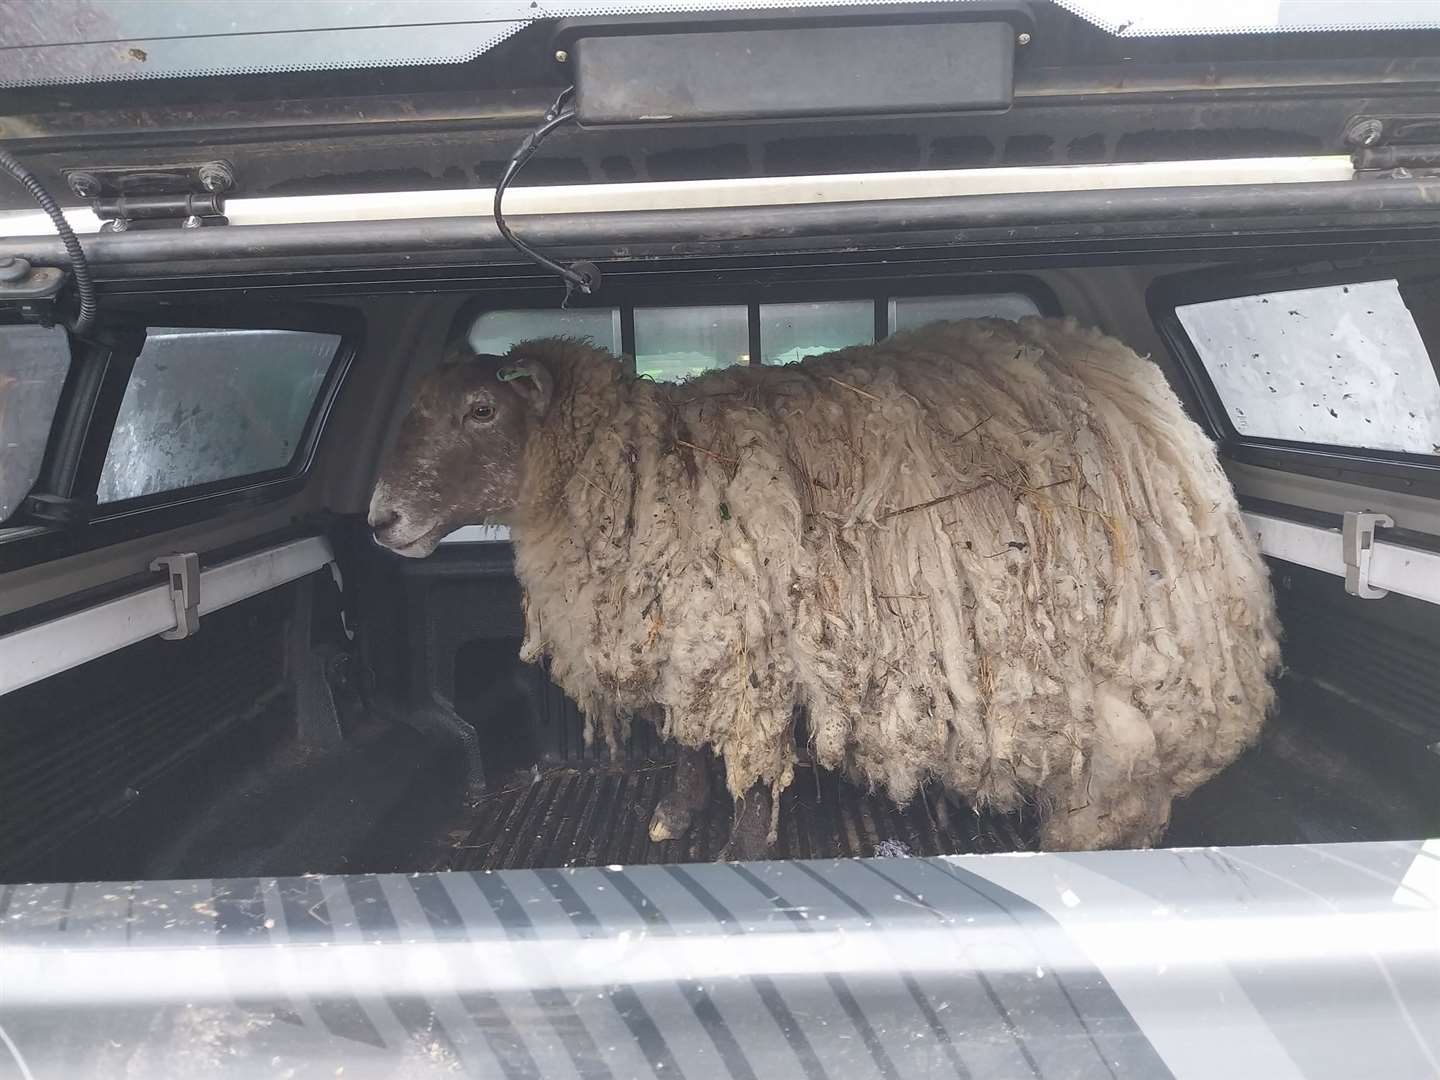 Fiona the sheep after her rescue.